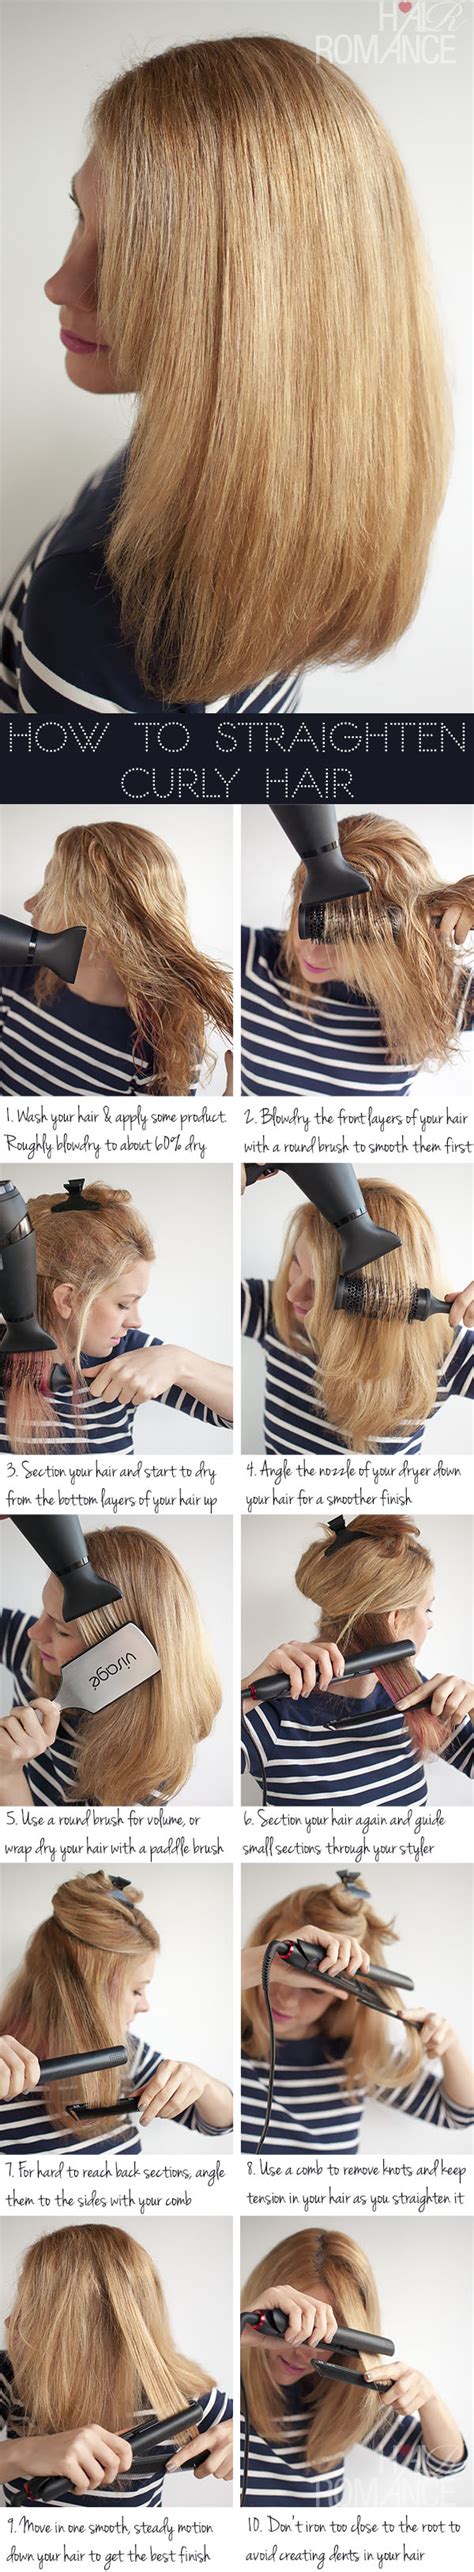 How To Straighten Curly Hair With The Elkie Creative Styler Hair Romance